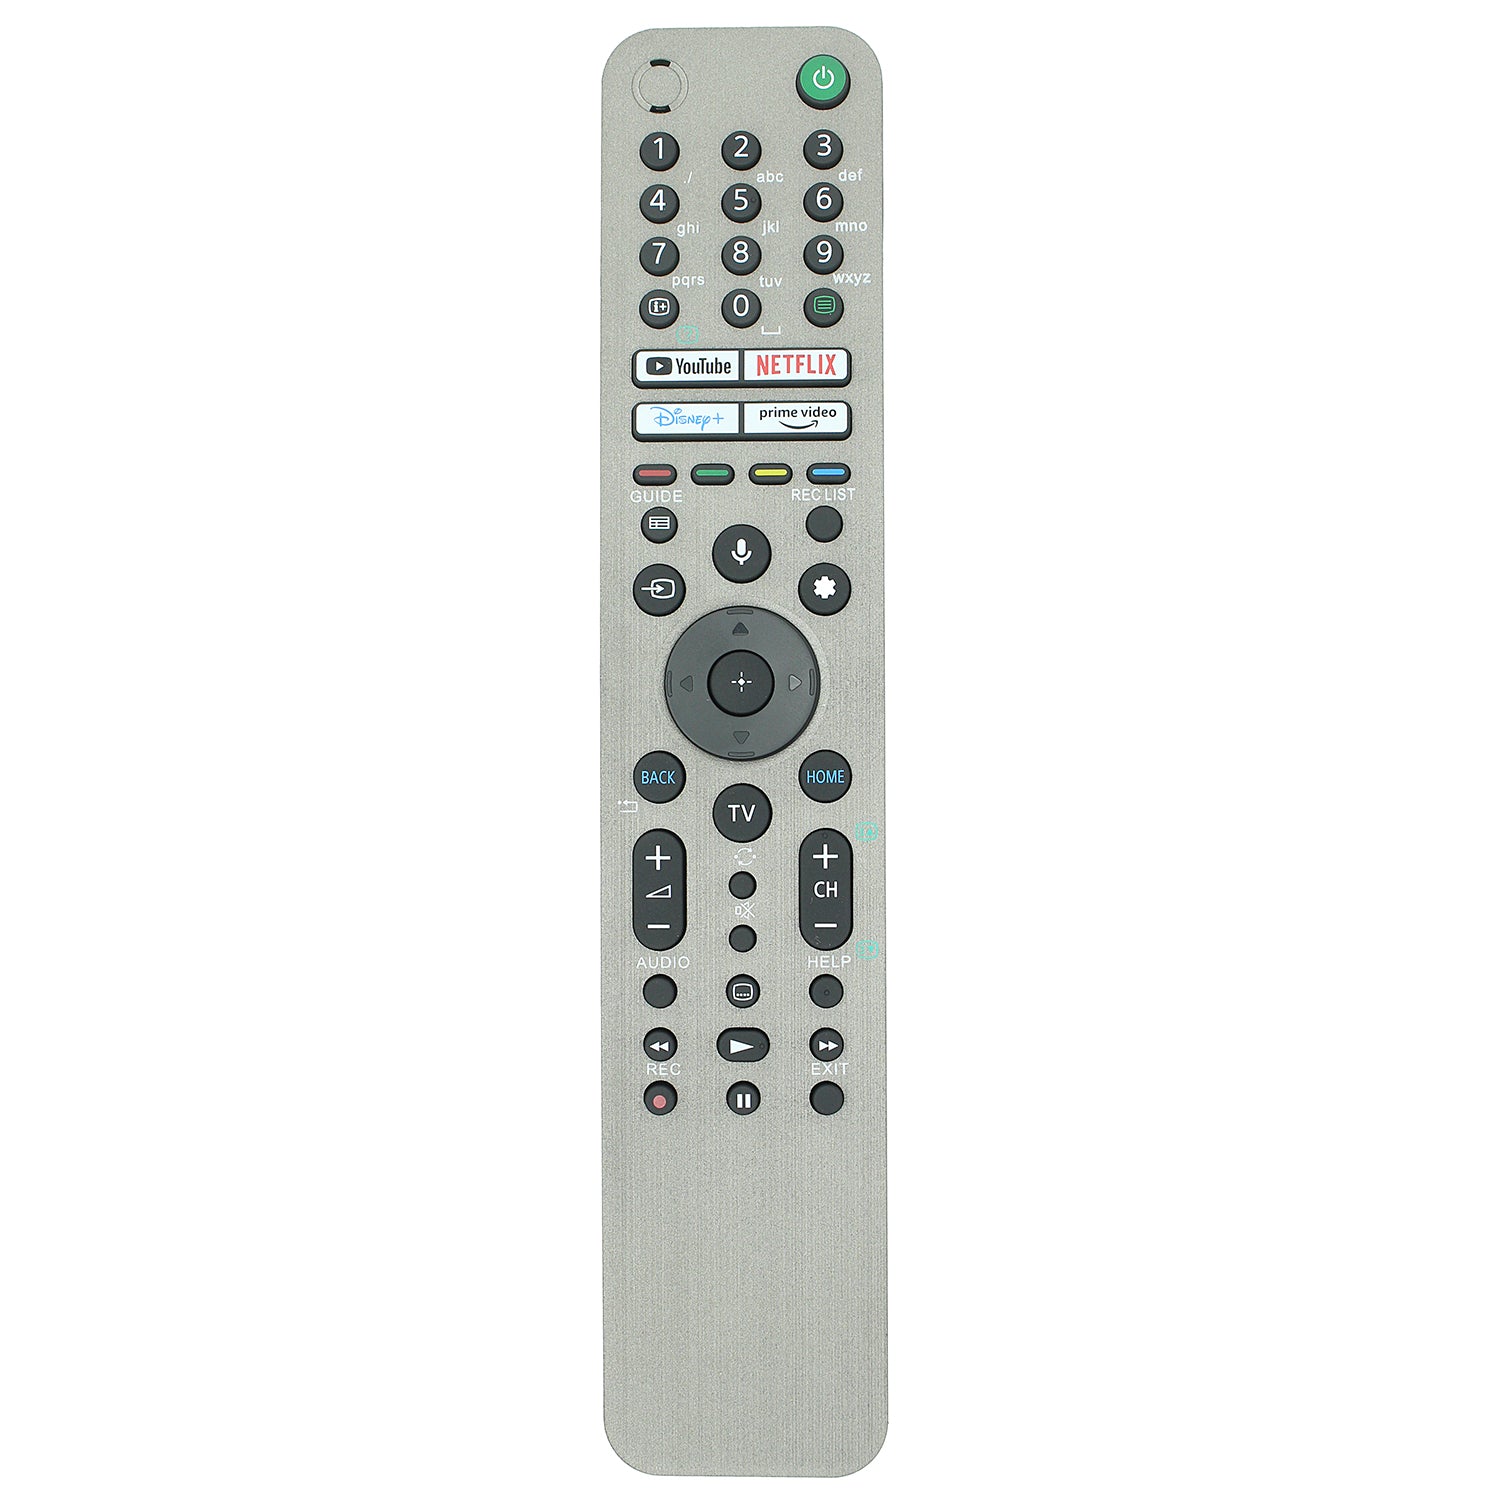 RMF-TX621E Voice Remote Control Replacement for Sony 4Κ 8K HD TV